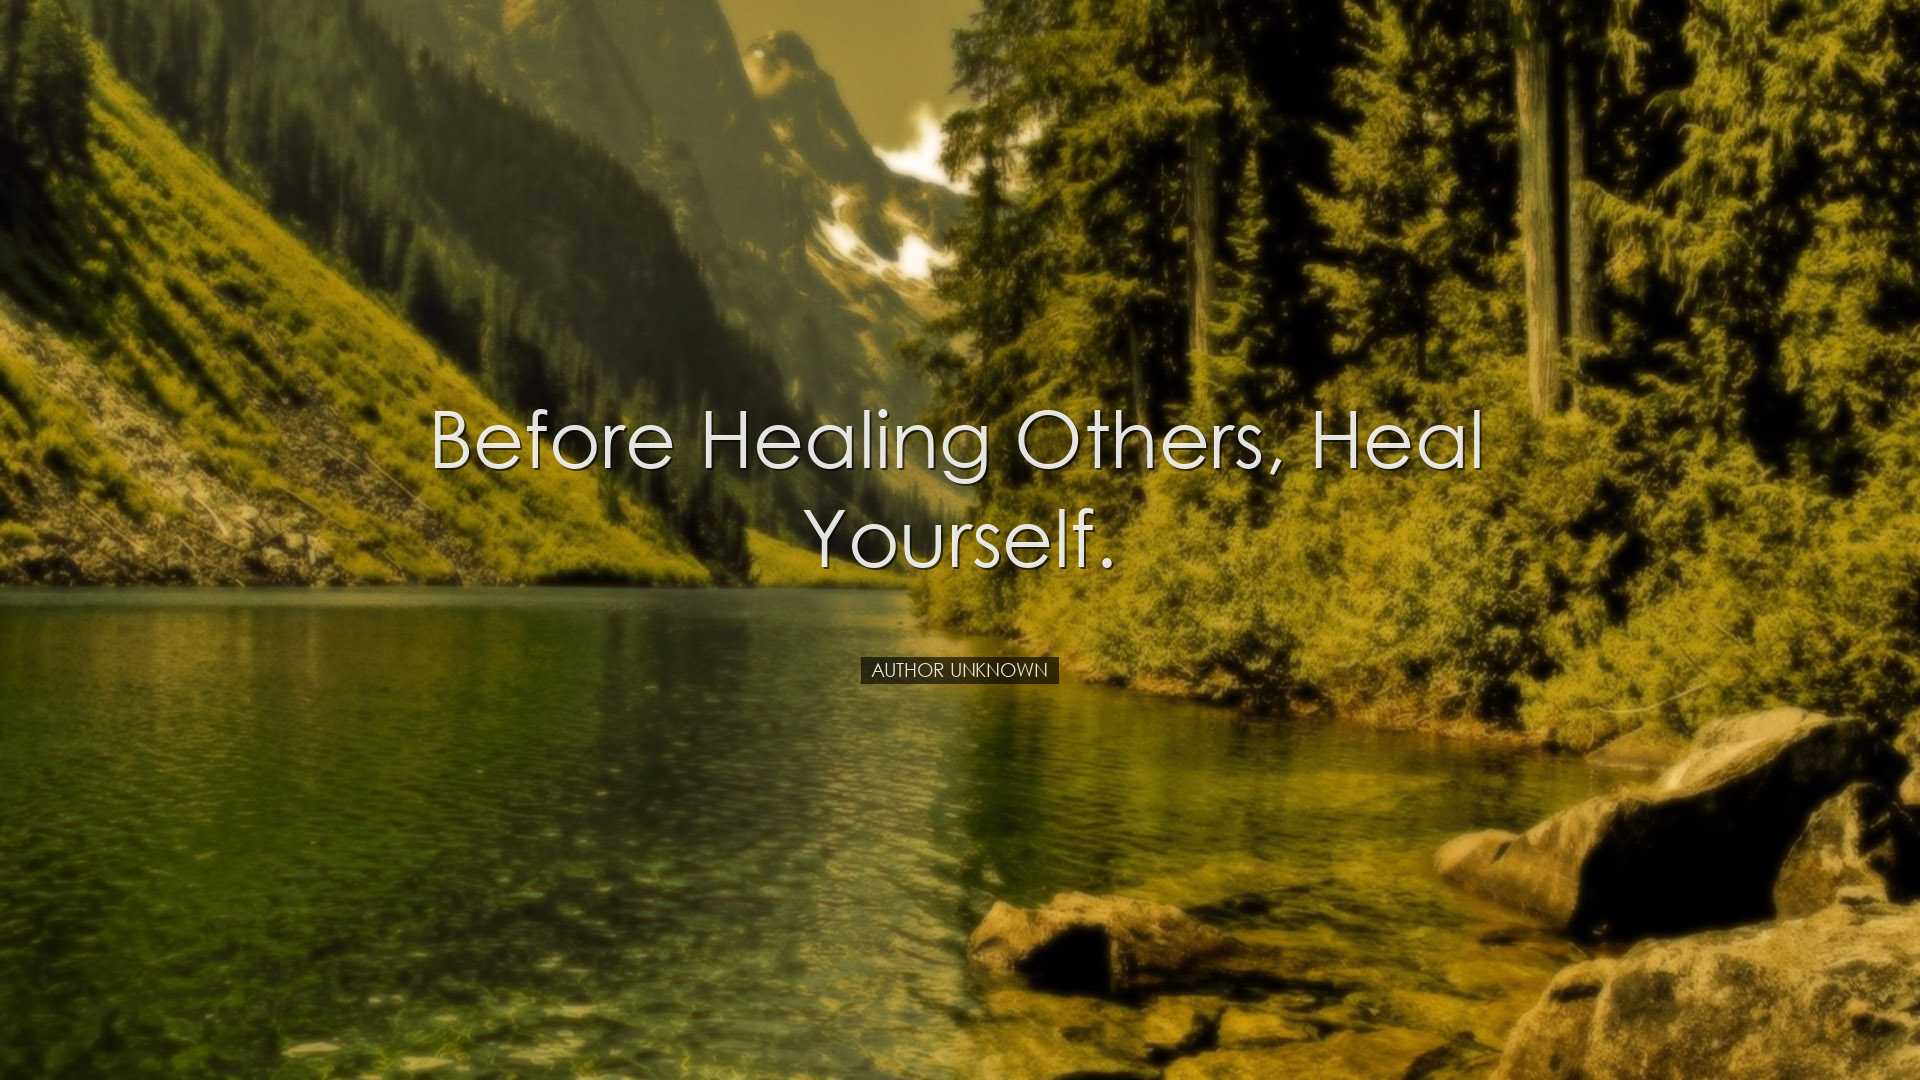 Before healing others, heal yourself. - Author unknown